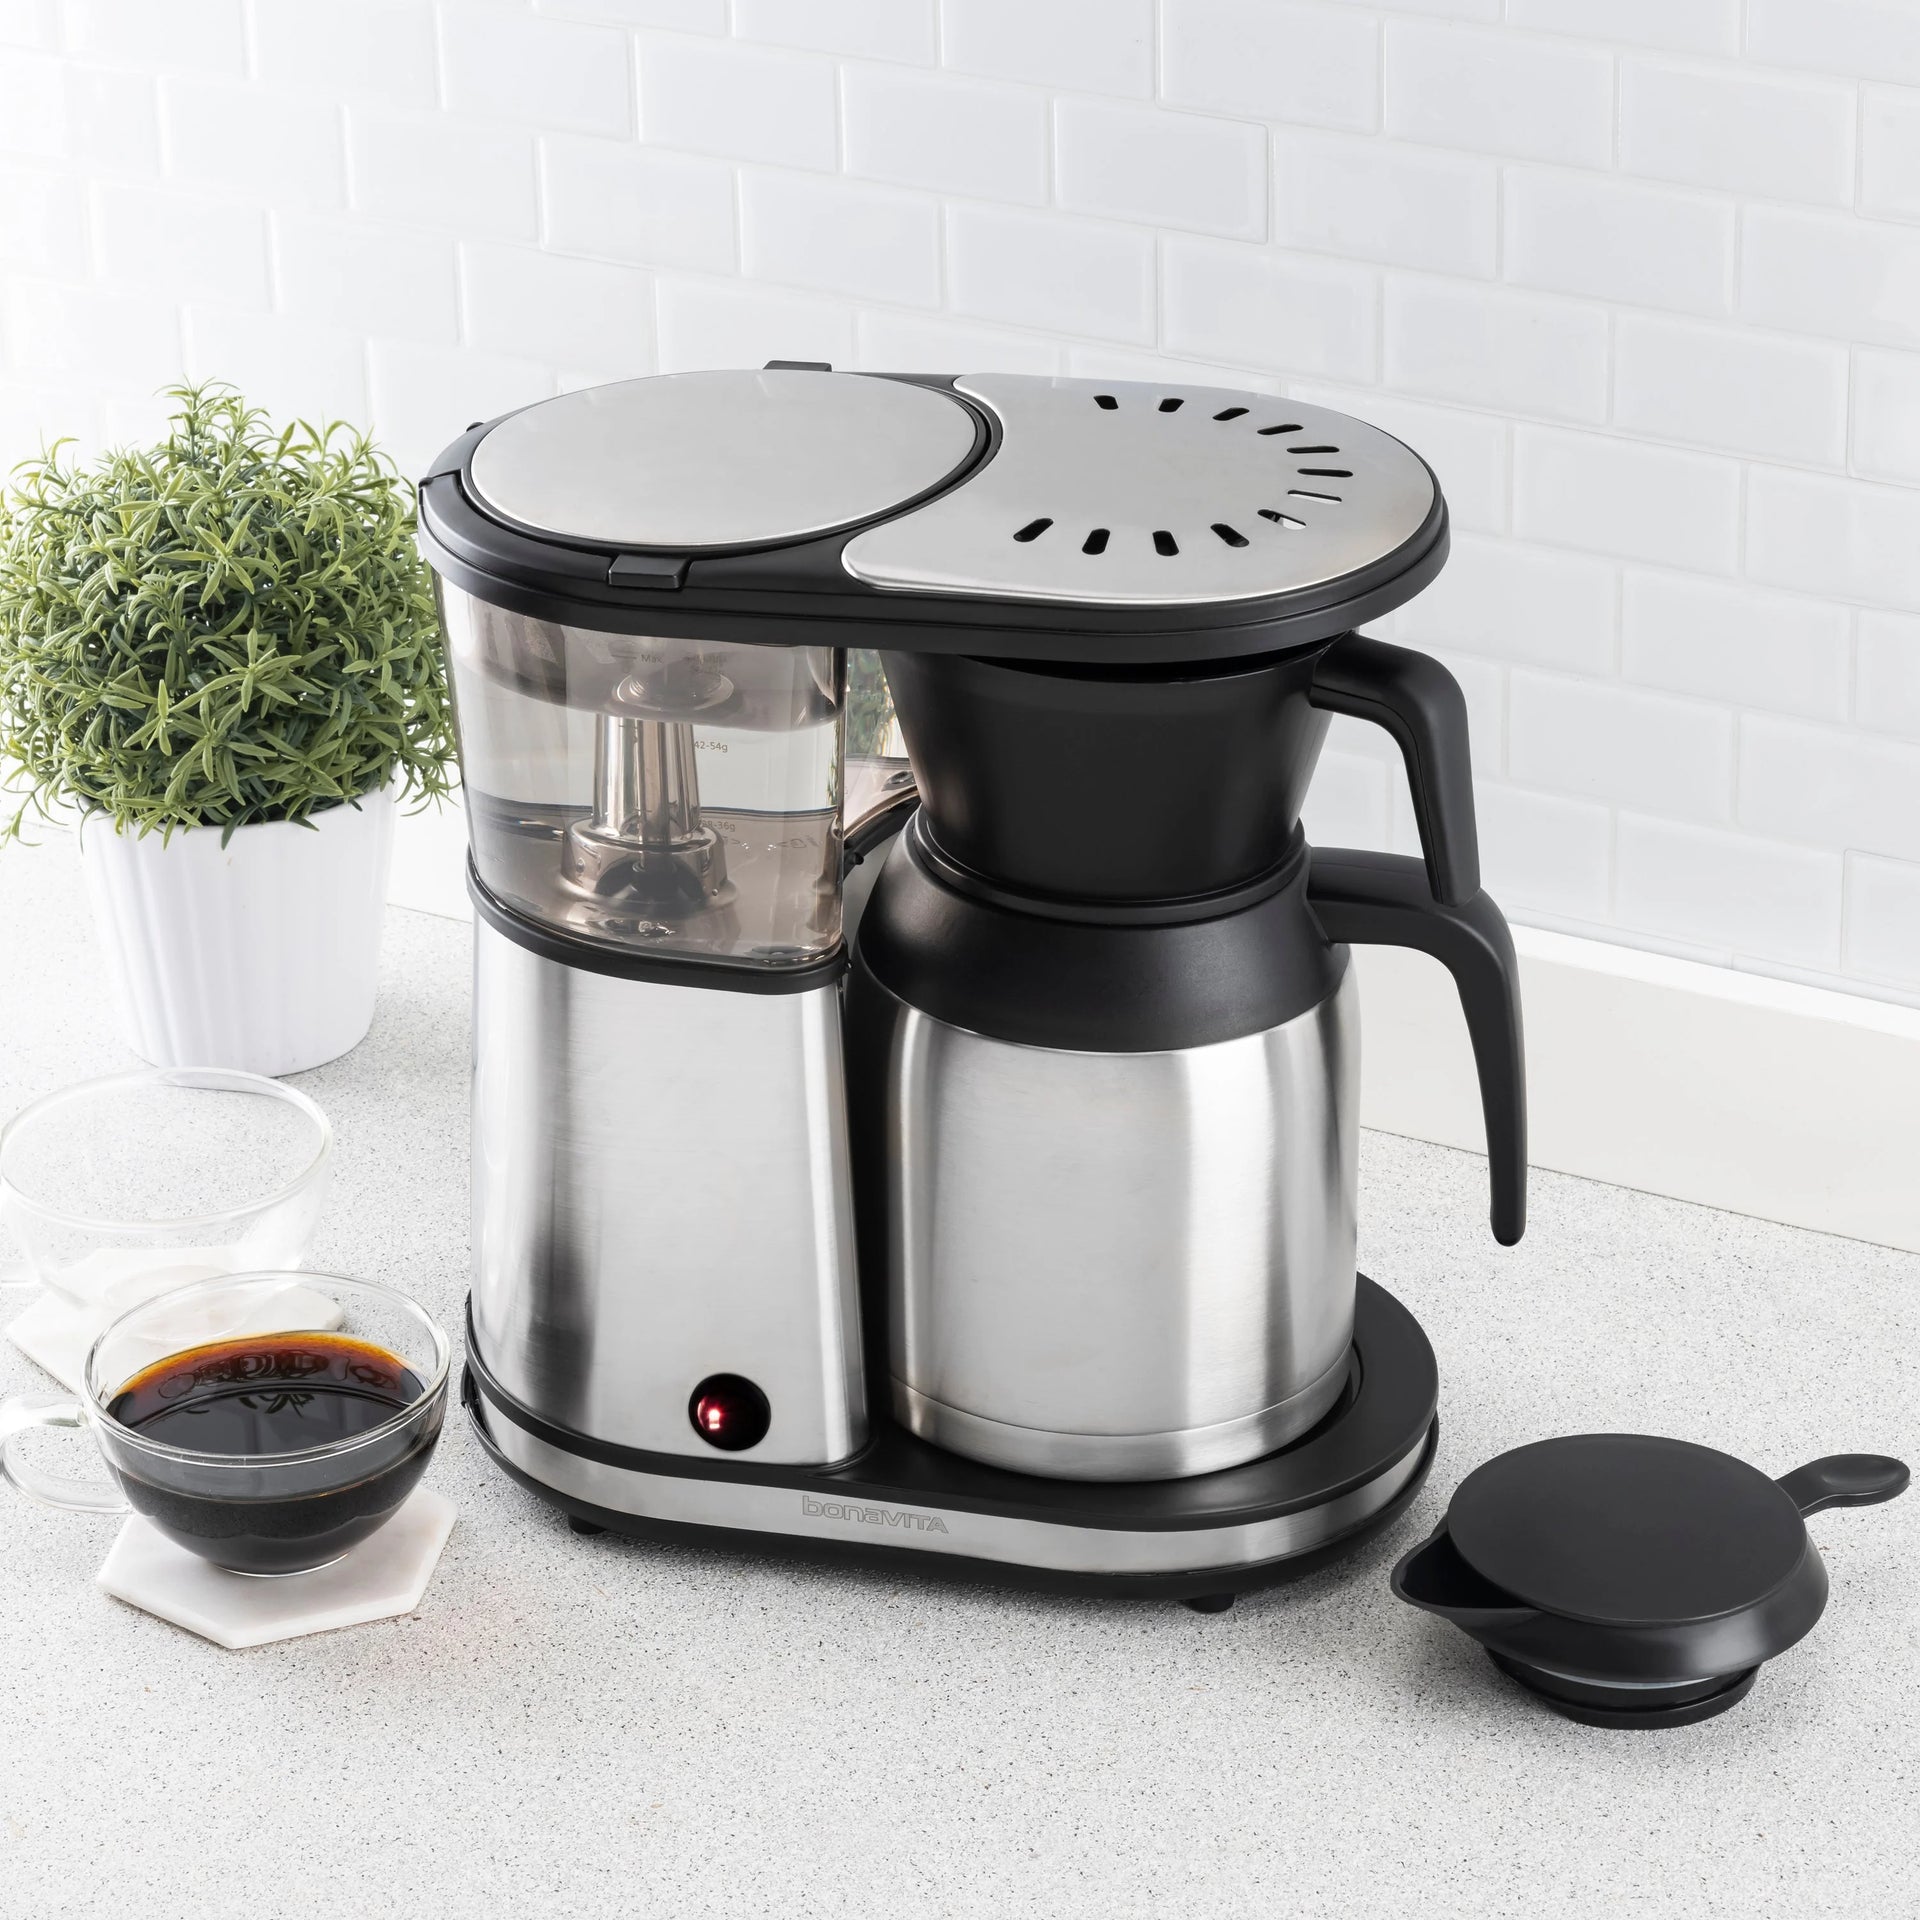 Bonavita 8 Cup Coffee Maker, One-Touch Pour Over Vietnam